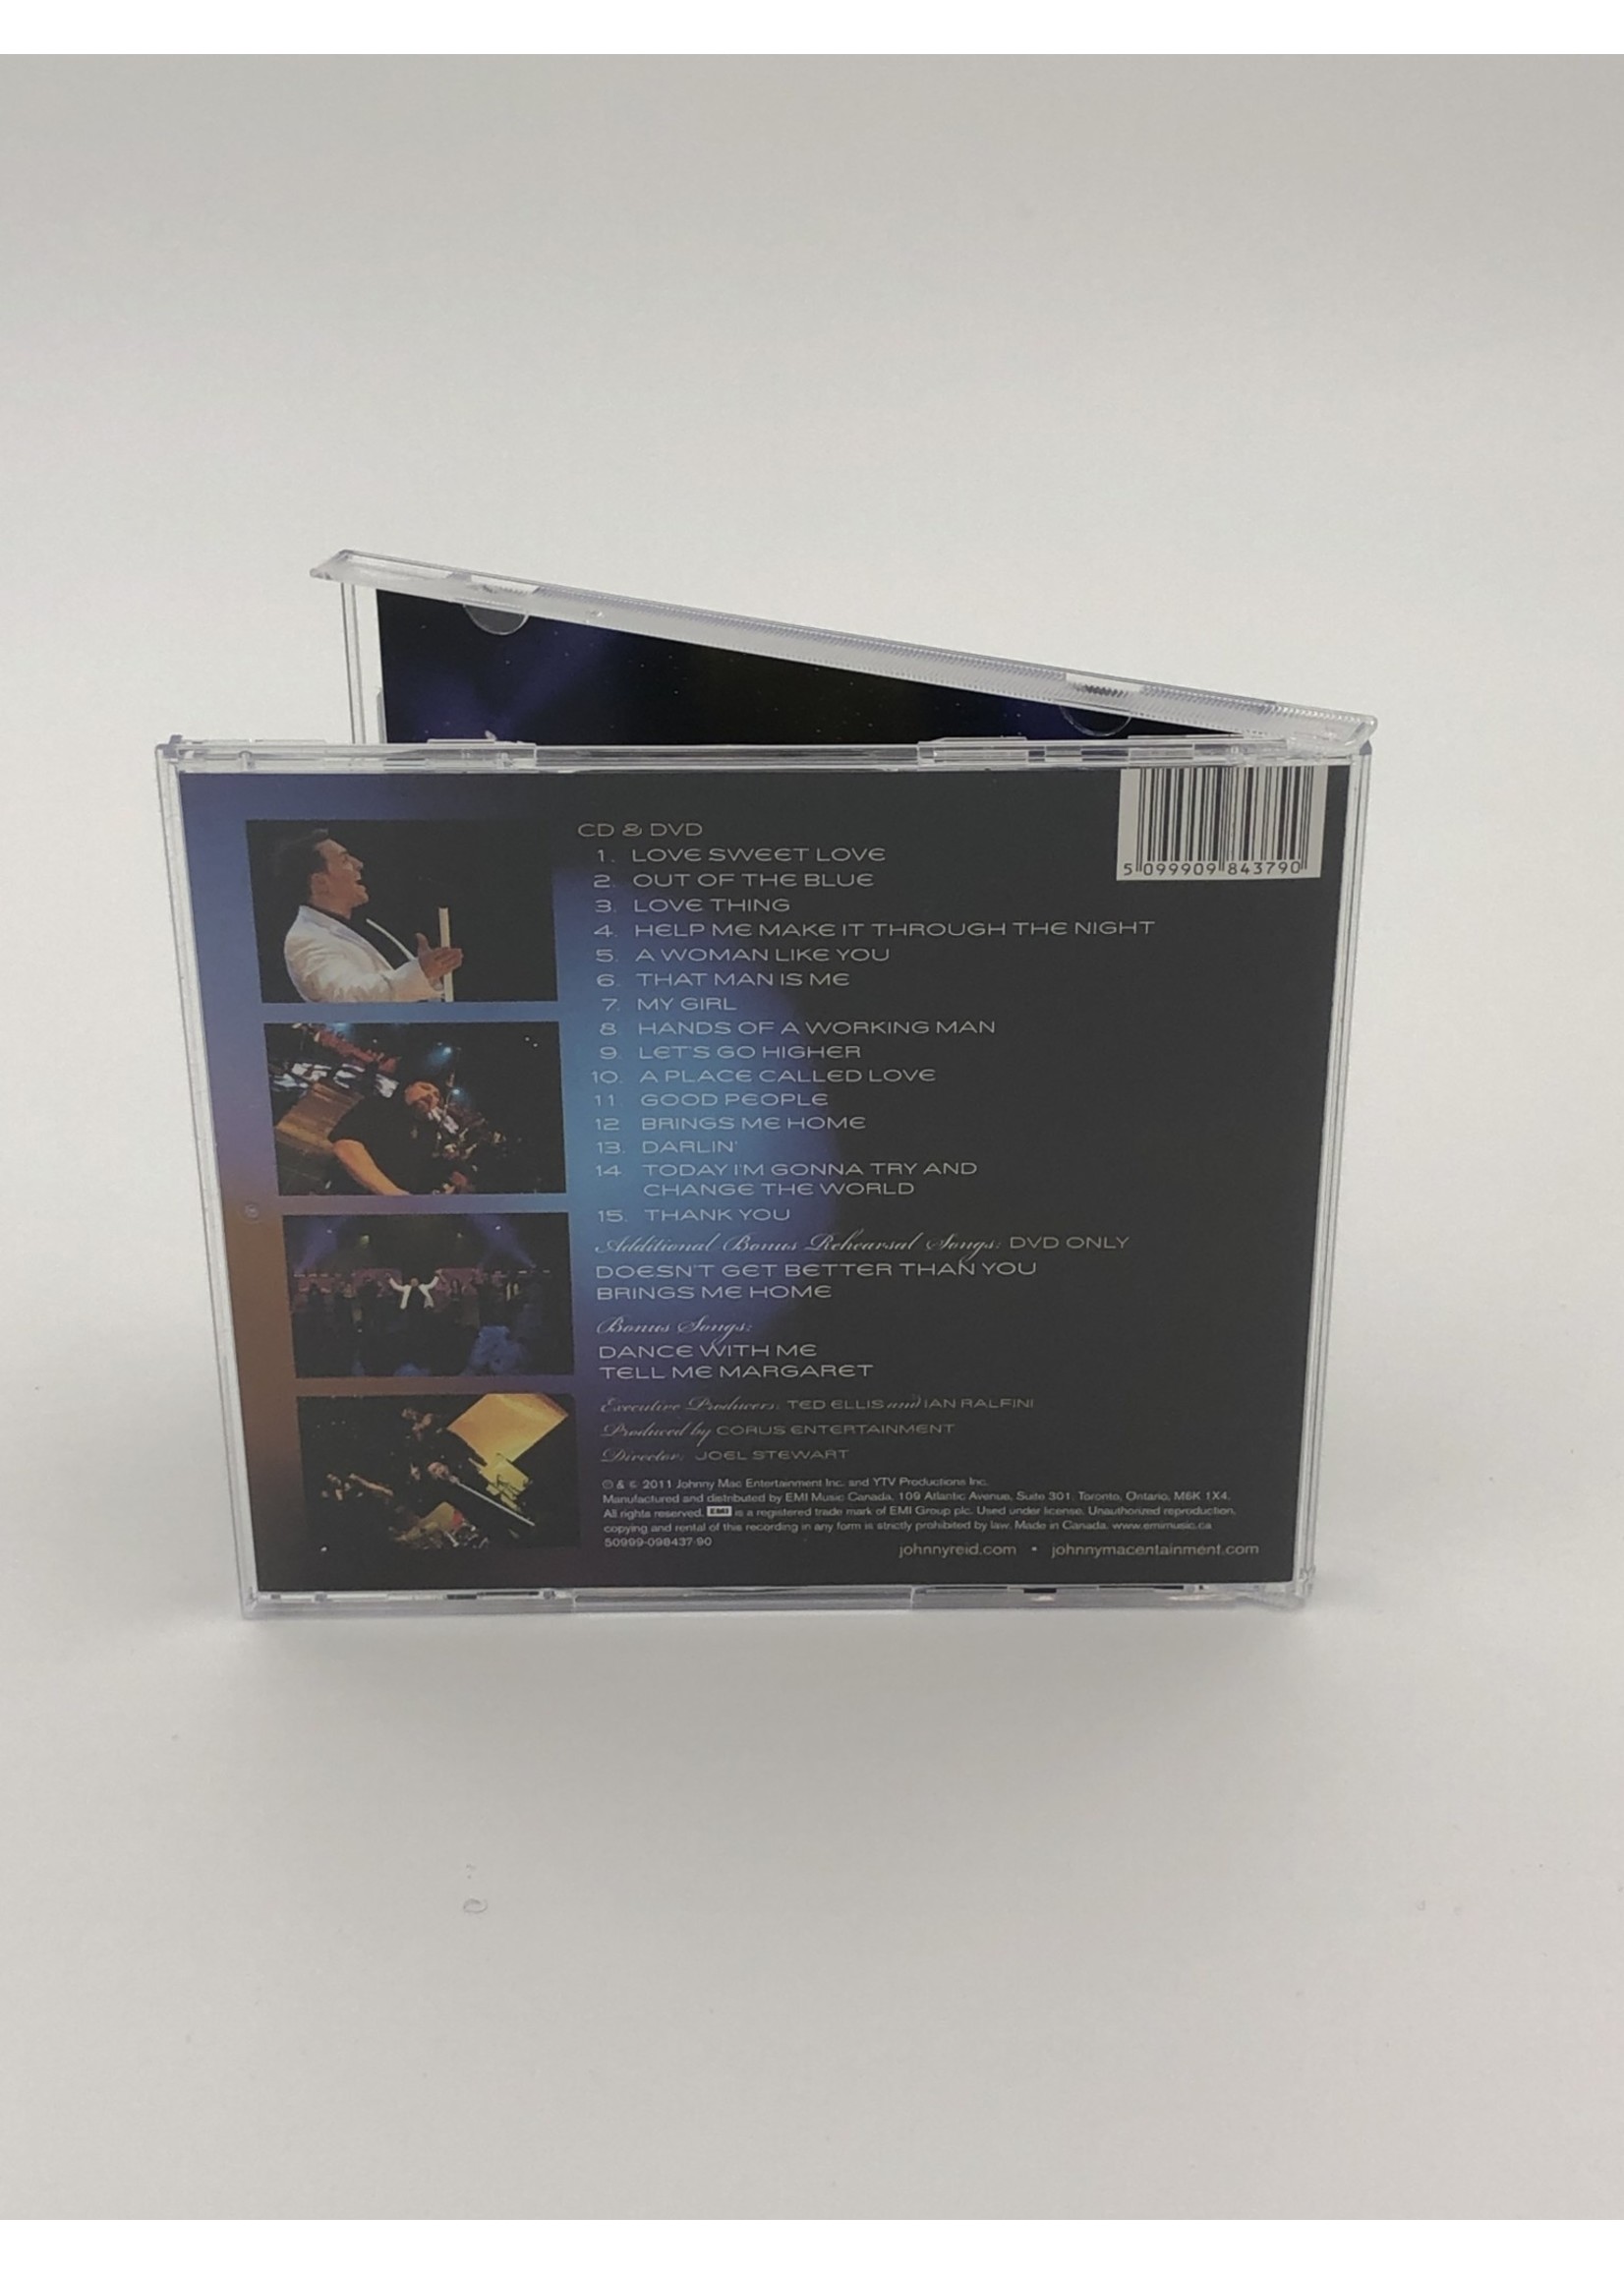 CD Johnny Reid A Place Called Love Live in Concert Heart and Soul 2 CD